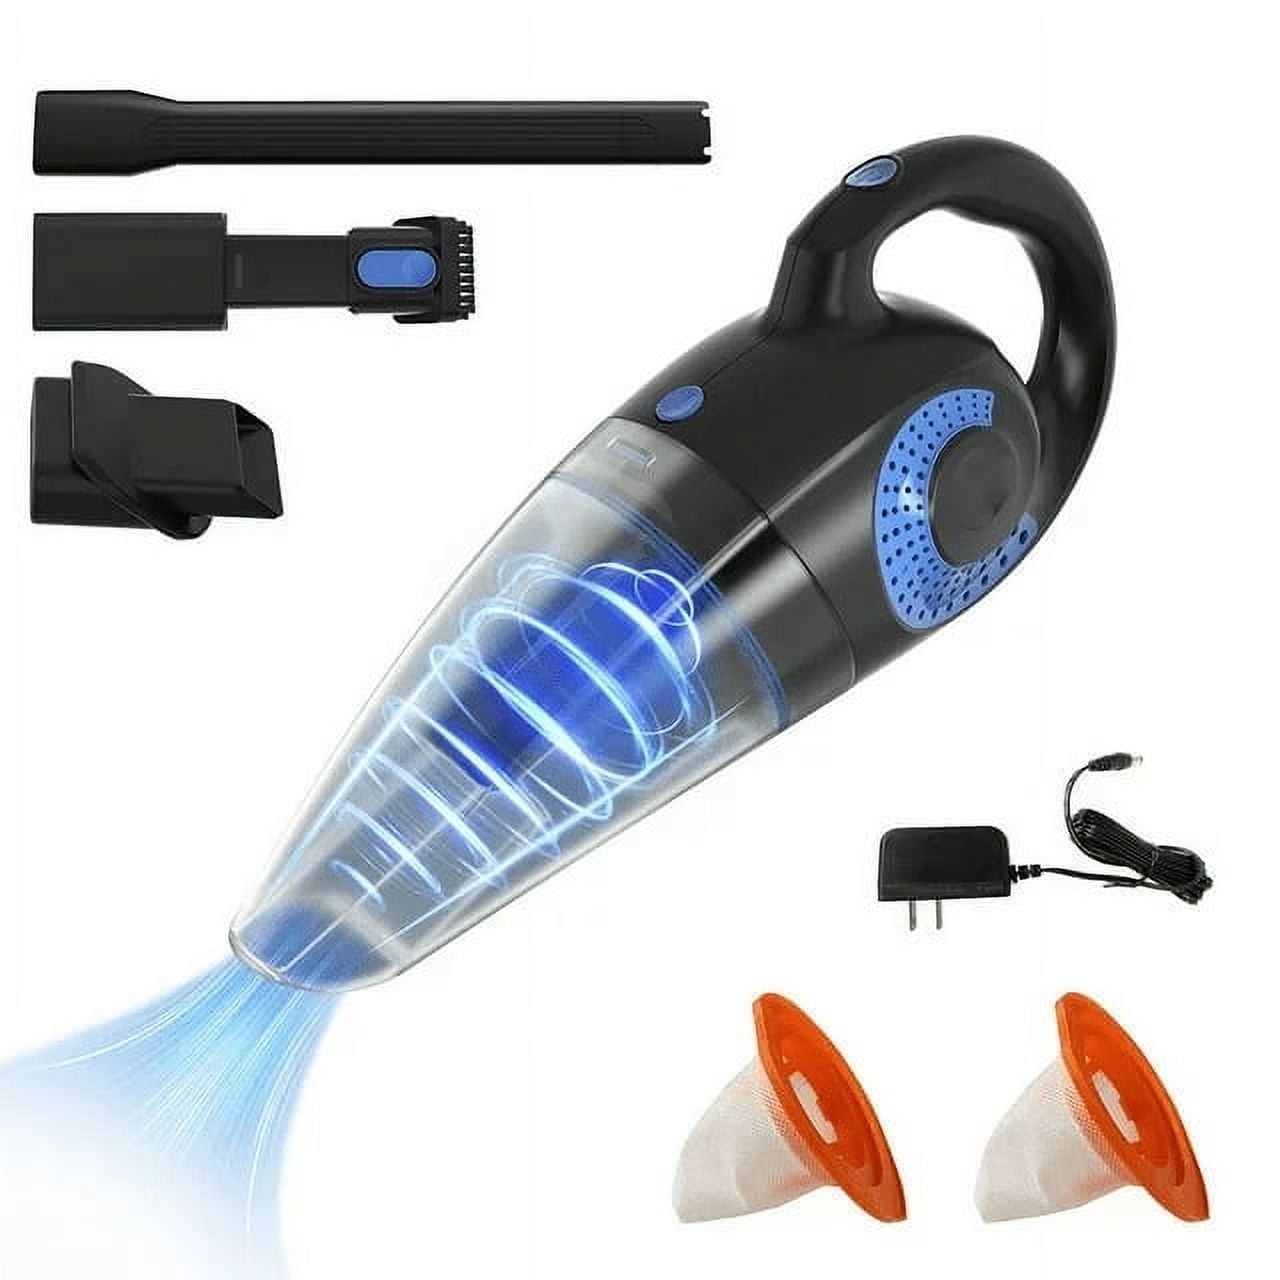 Original Xiaomi Mijia Portable Handheld Vacuum Cleaner For Home Car Mini  Wireless Dust Catcher Collector 13000pa Cyclone Suction - Vacuum Cleaners -  AliExpress